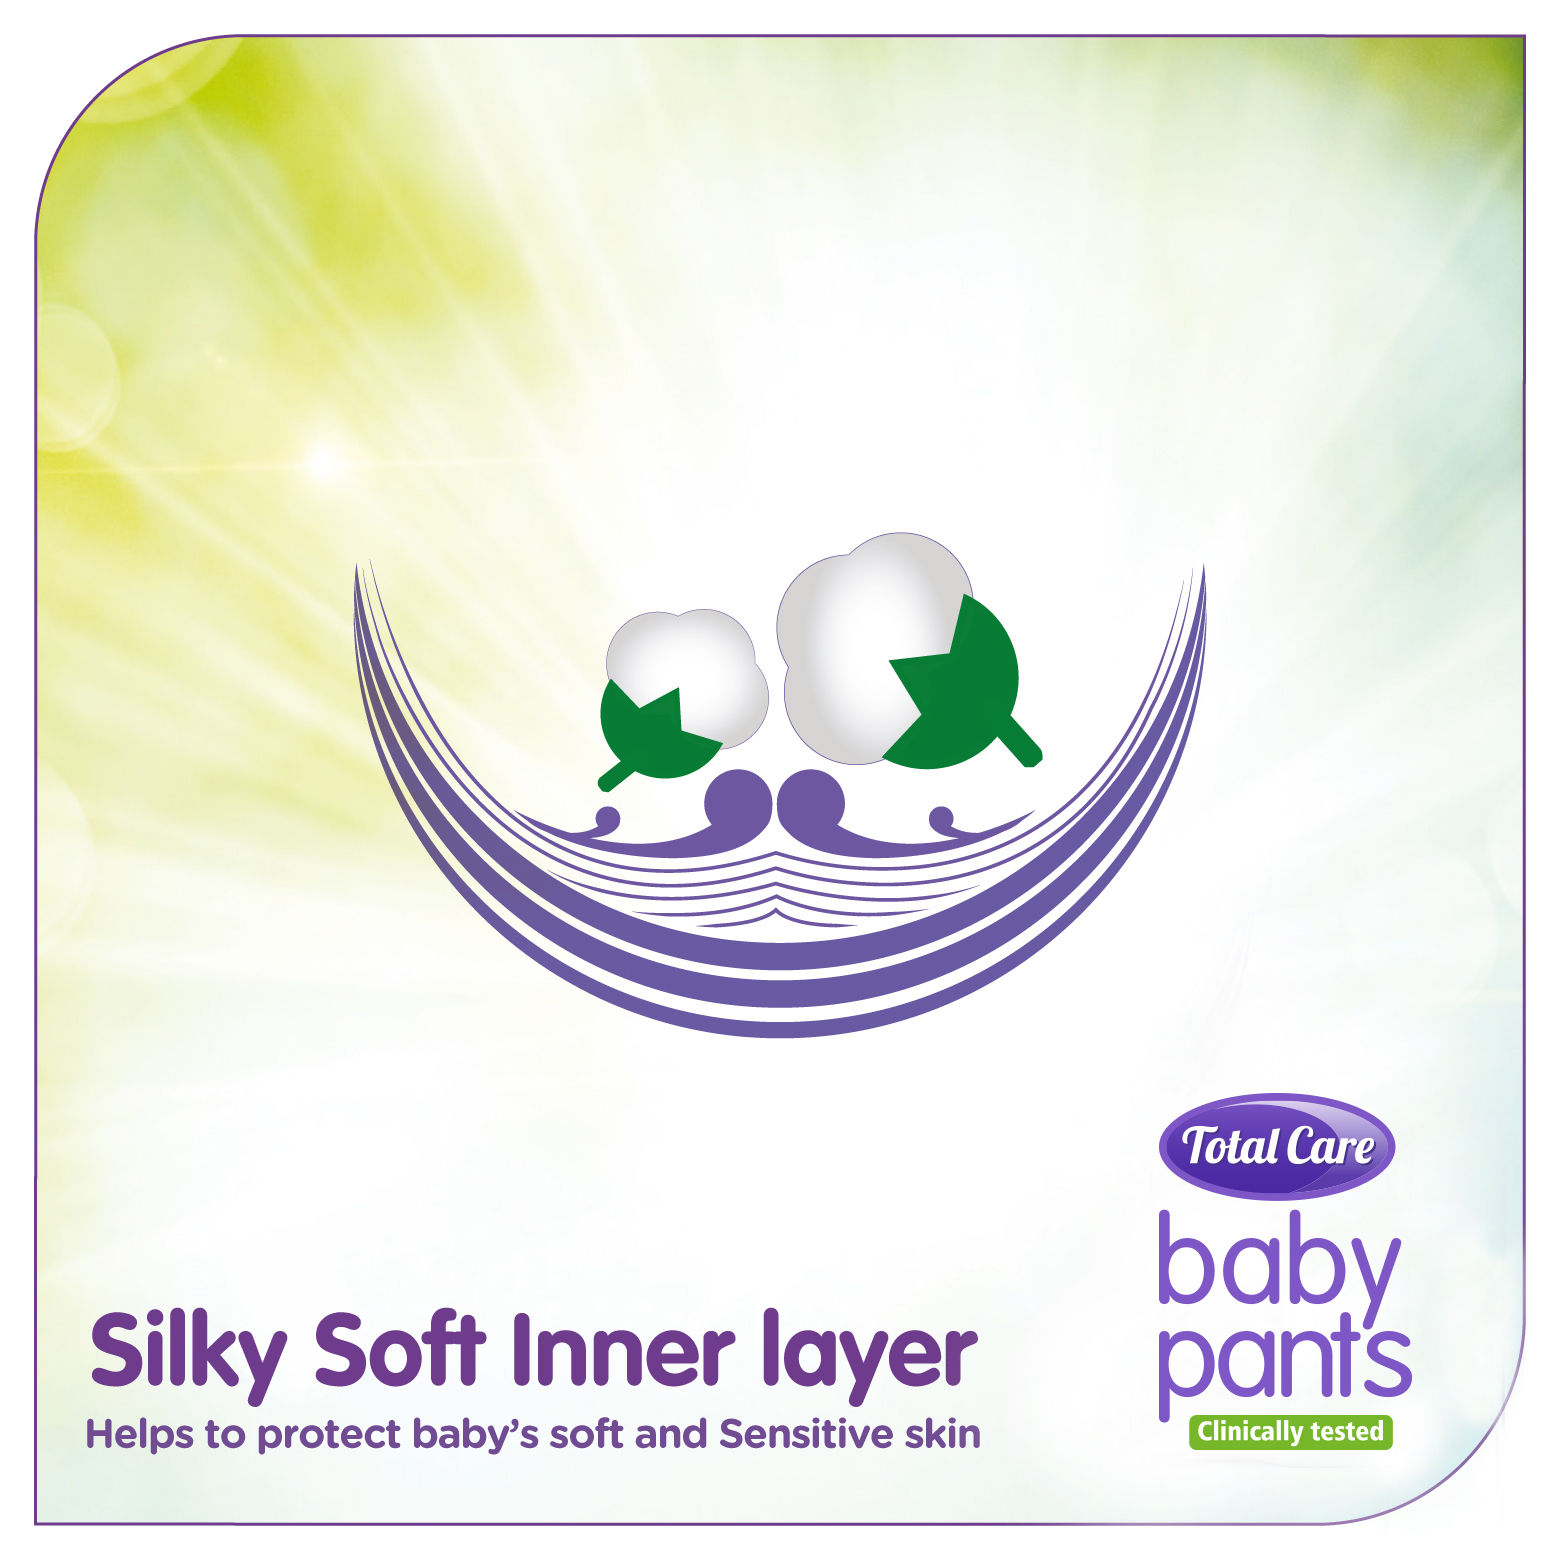 Himalaya Total Care Baby Pants Small (54): Uses, Price, Dosage, Side  Effects, Substitute, Buy Online